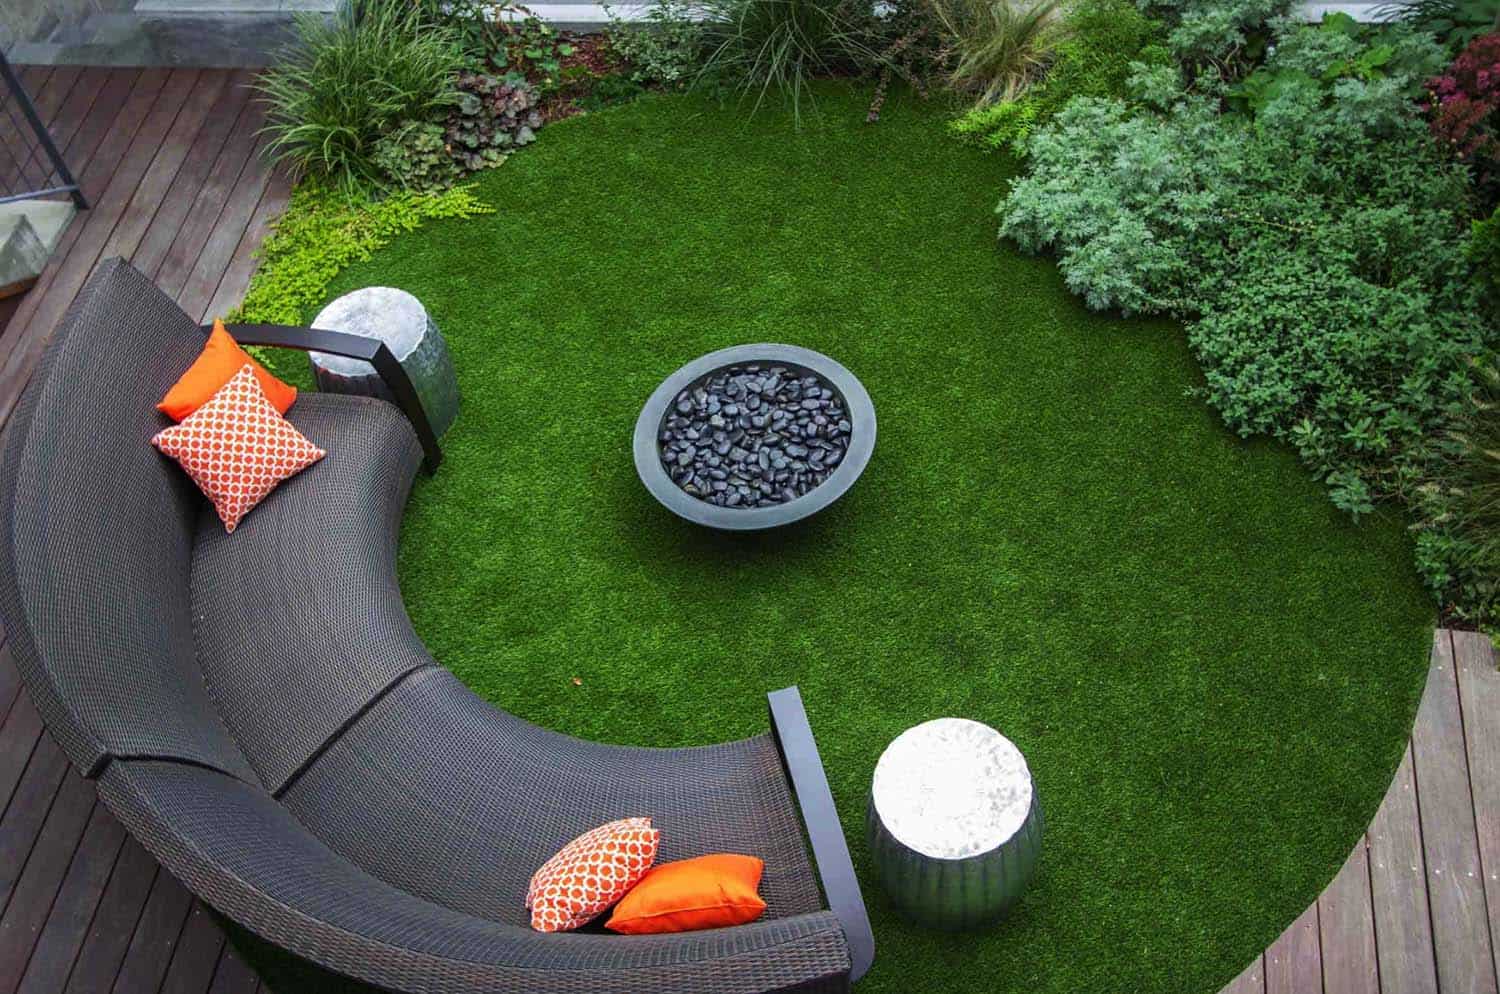 28 Inspiring Fire Pit Ideas To Create A, Fire Pit On Grass